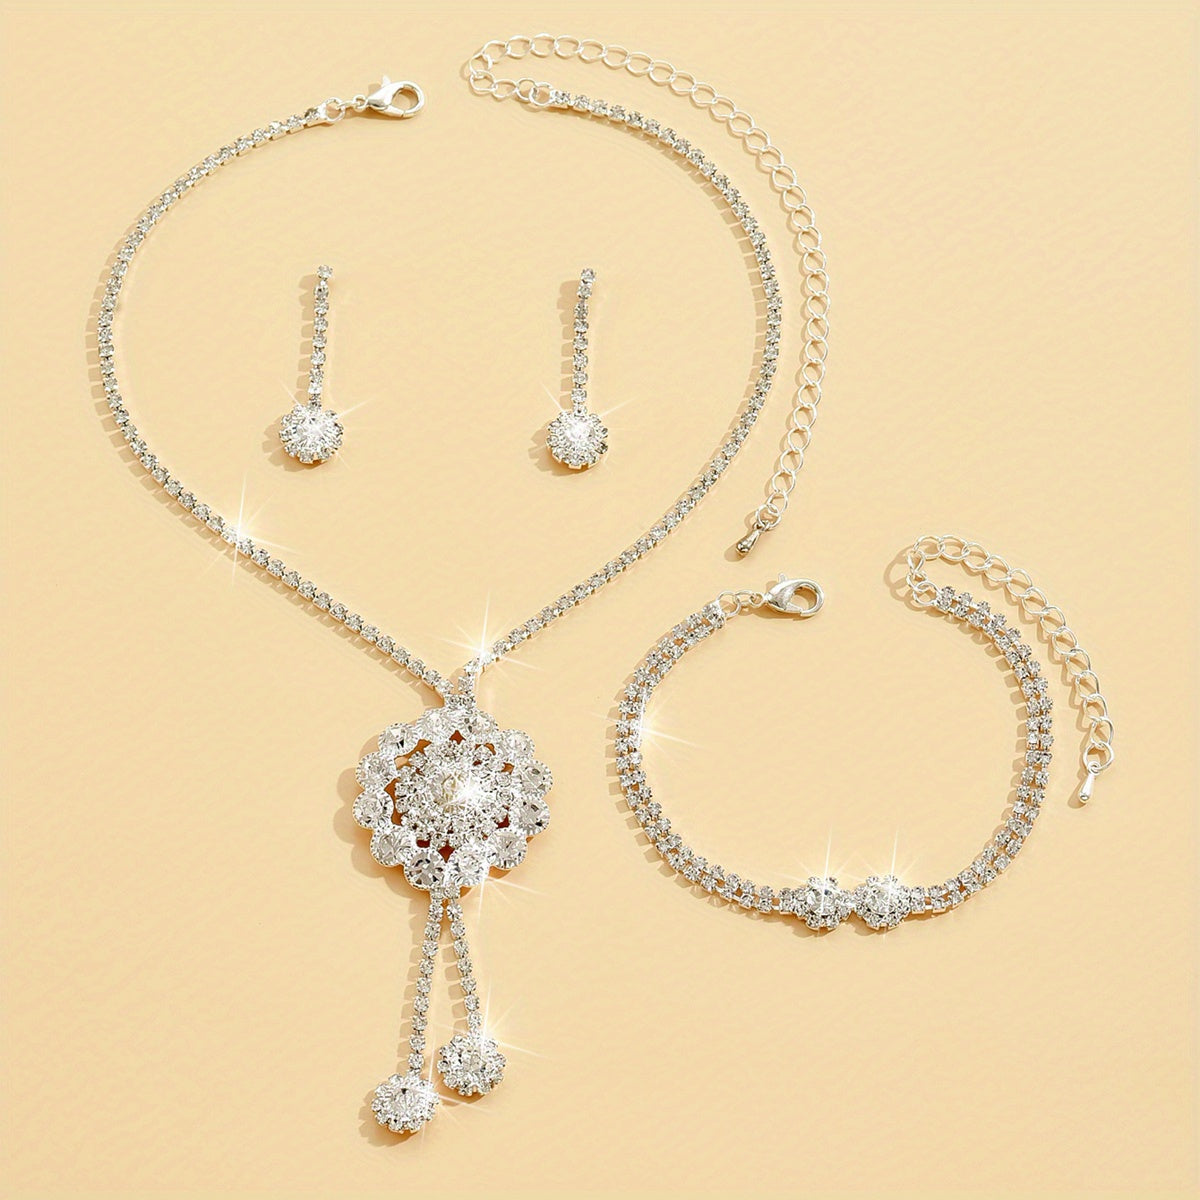 4pcs Elegant Sunflower Jewelry Set - Silver Plated Necklace, Earrings, and Bracelet with Rhinestone Inlay - Perfect for Parties and Special Occasions